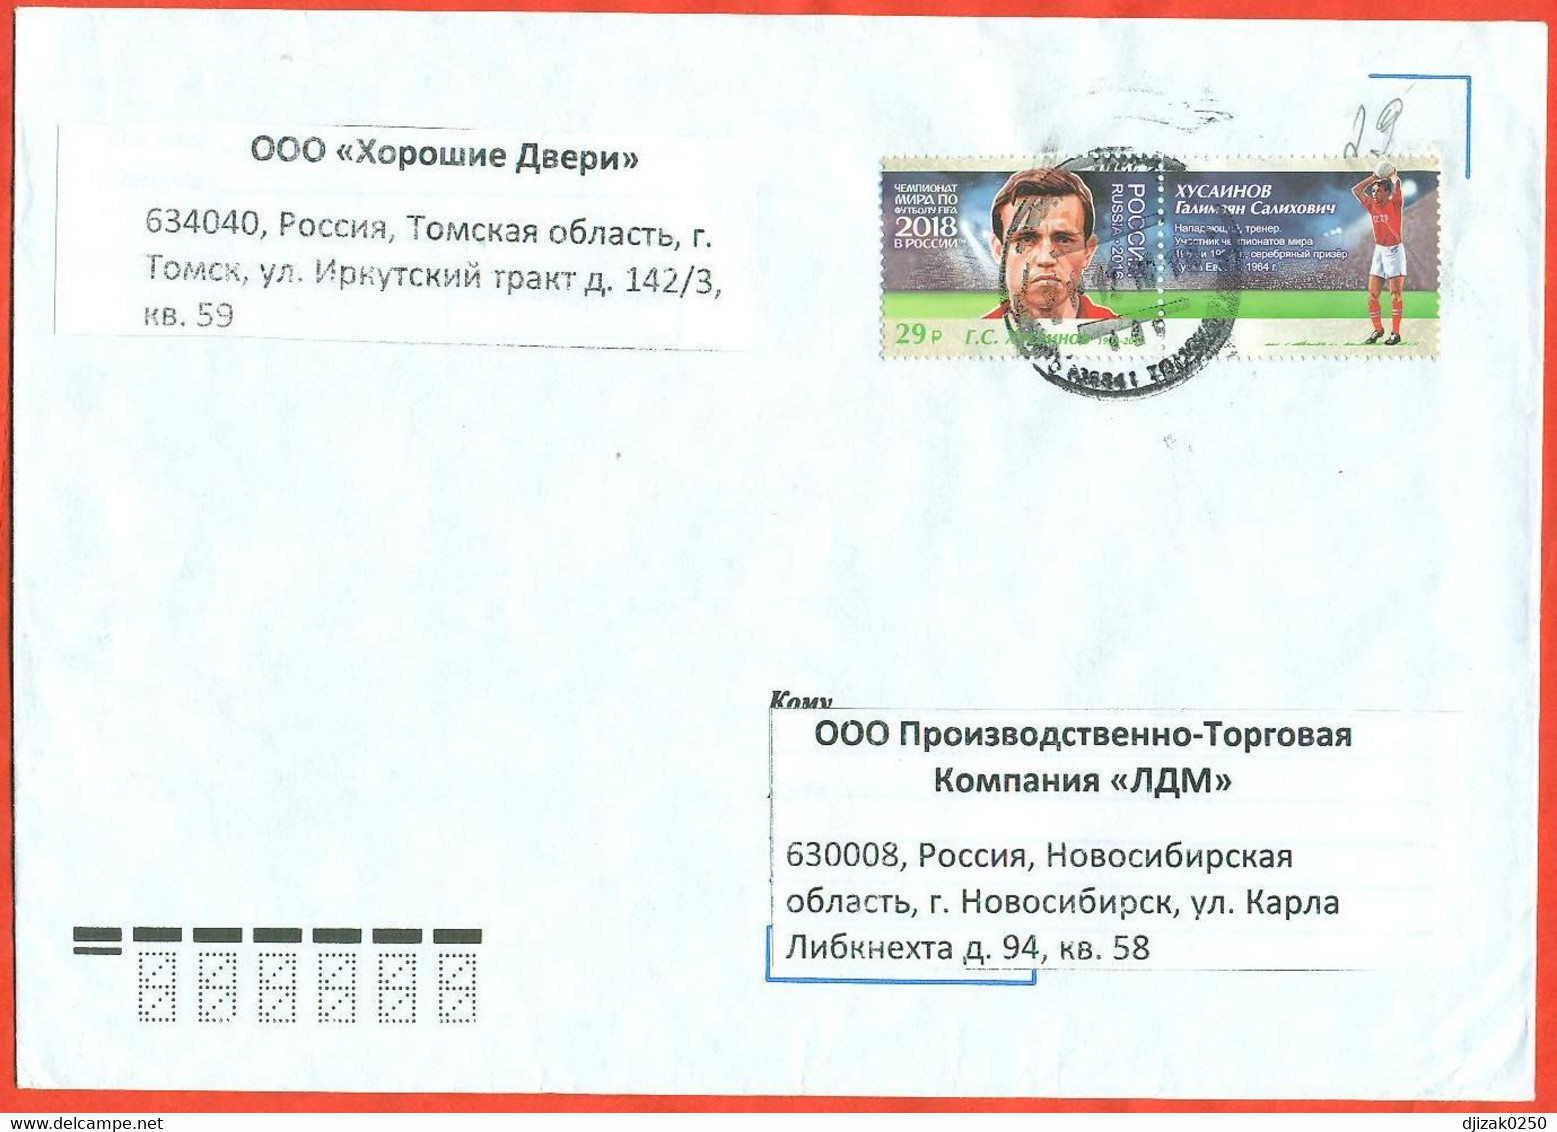 Russia 2018. FIFA Football World Cup 2018, Russia - Legends Of Russian Football The Envelope  Passed Through The Mail. - 2018 – Russie